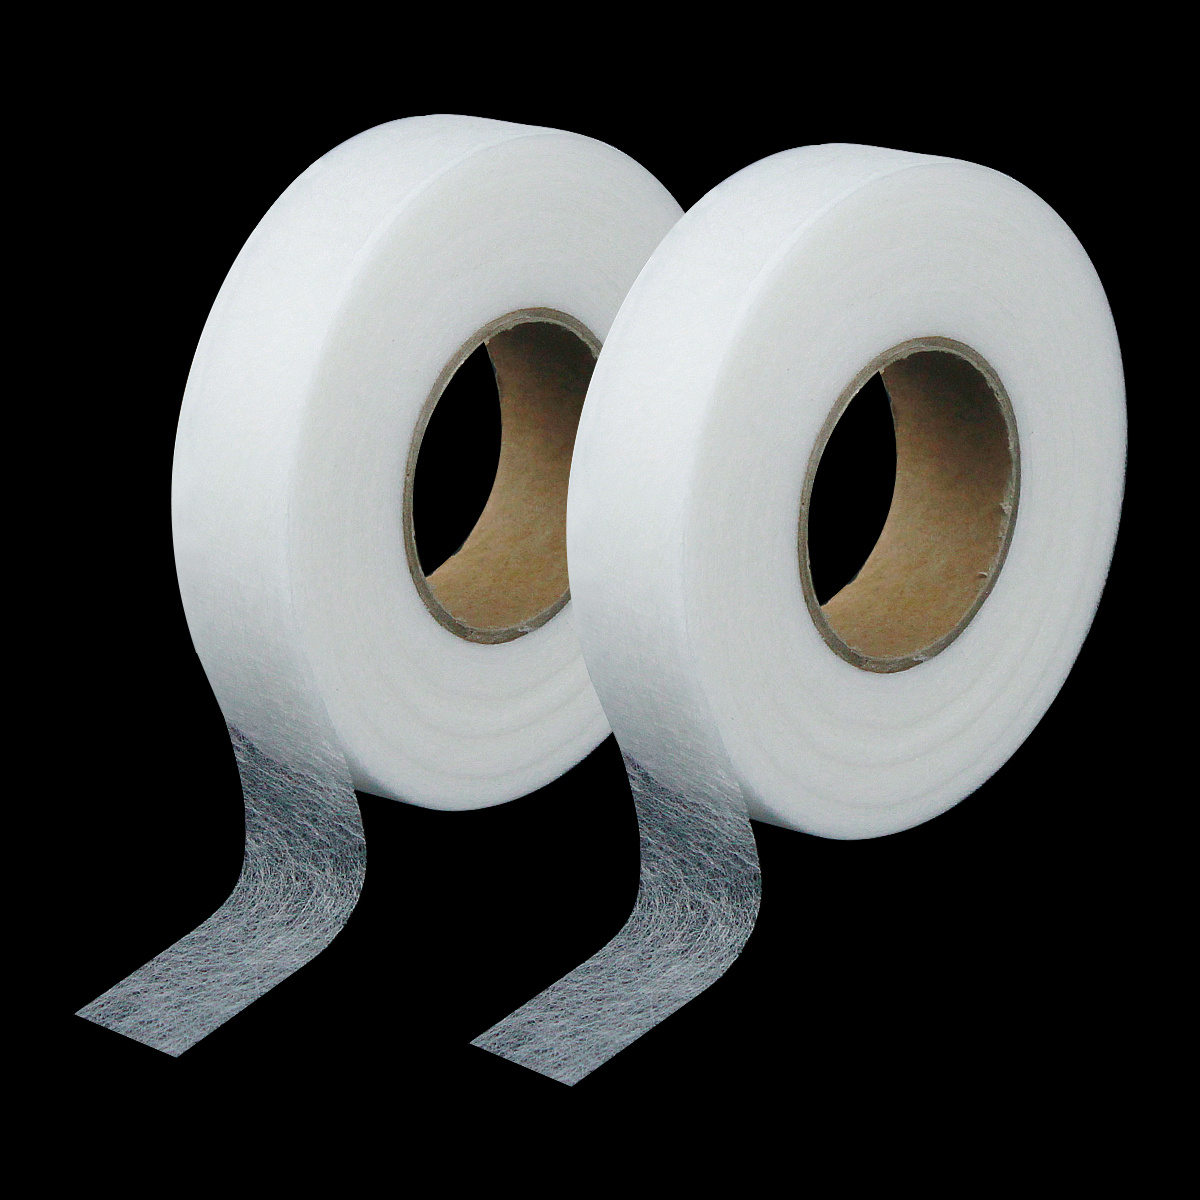 2 Rolls 140 Yards/ 5039.37 InchFabric Fusing Tape, White Hem Tape Adhesive,  Iron On Hemming Tape For Clothes Jeans Trousers